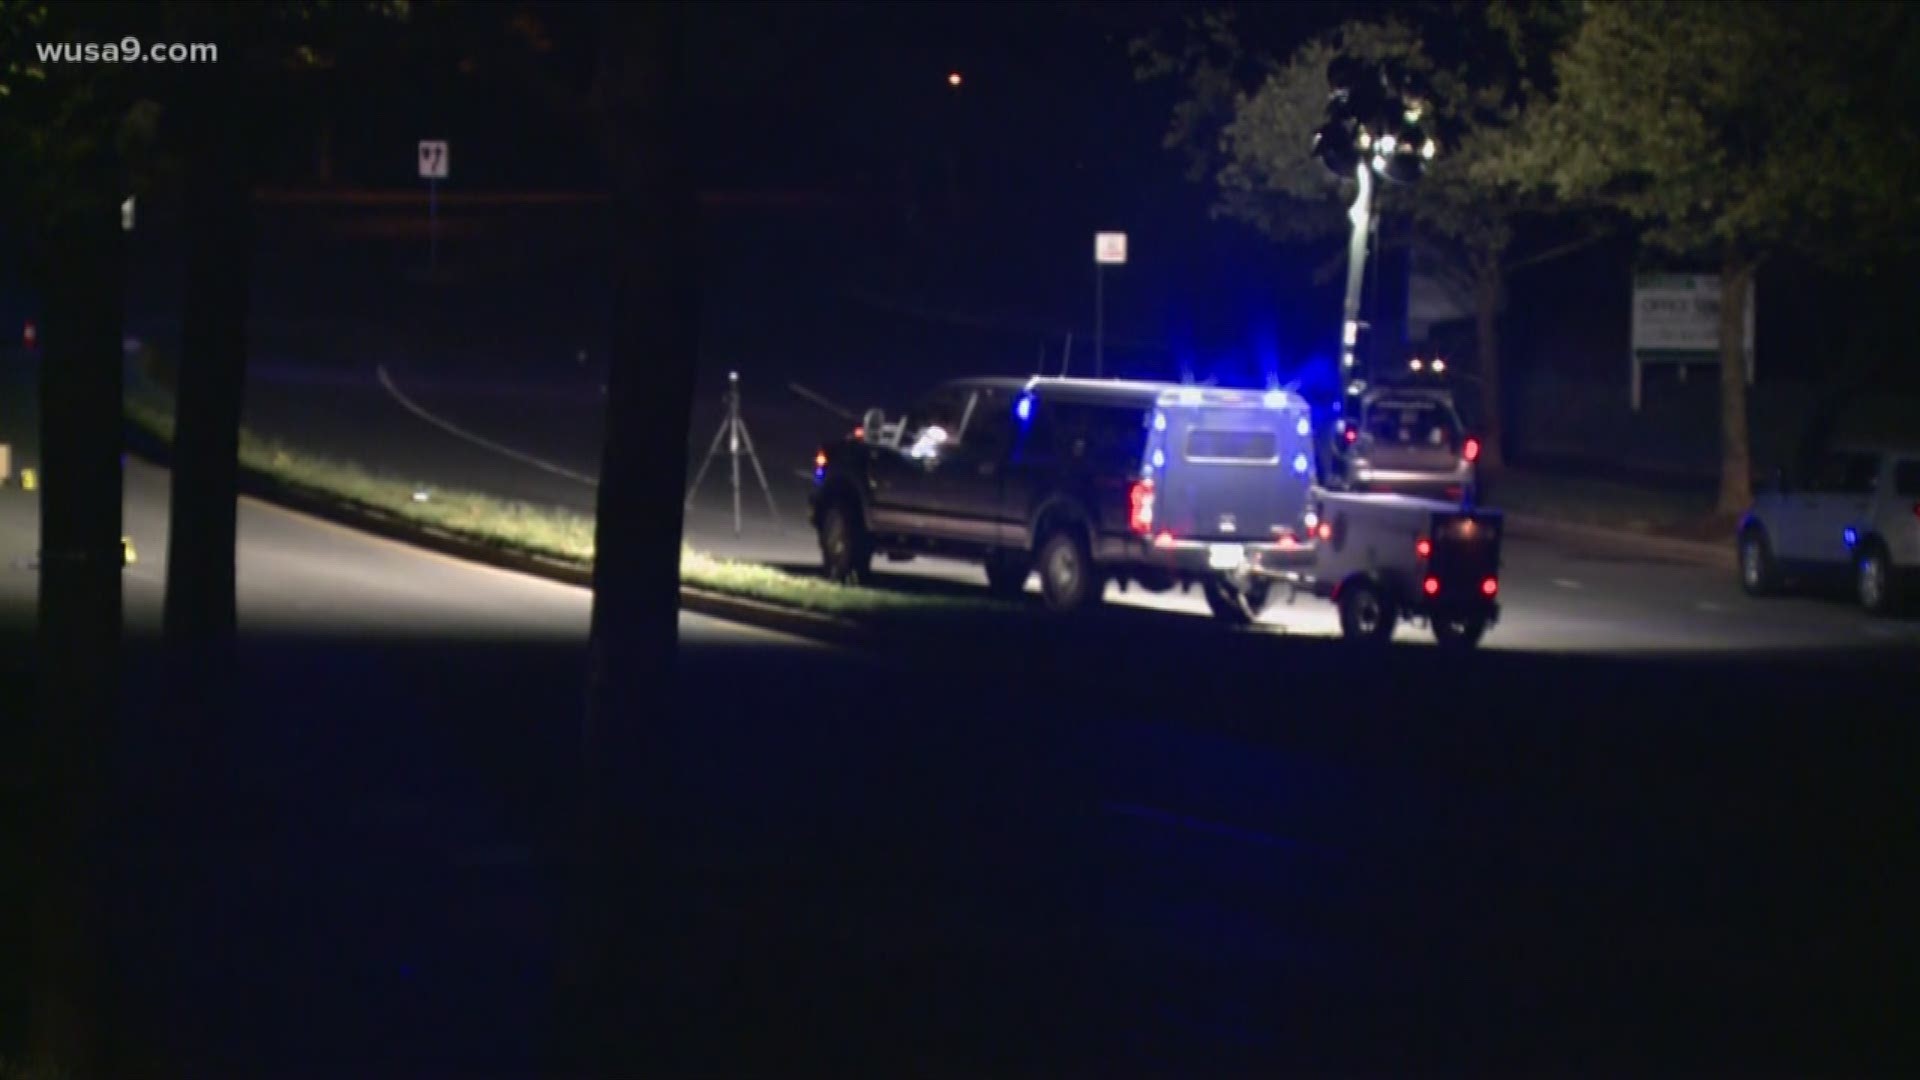 A pedestrian is dead after a driver hit and killed them early Friday morning and the drove away.

Fairfax County Police responded to the 12500 block of Fair Lakes Circle for a pedestrian struck.